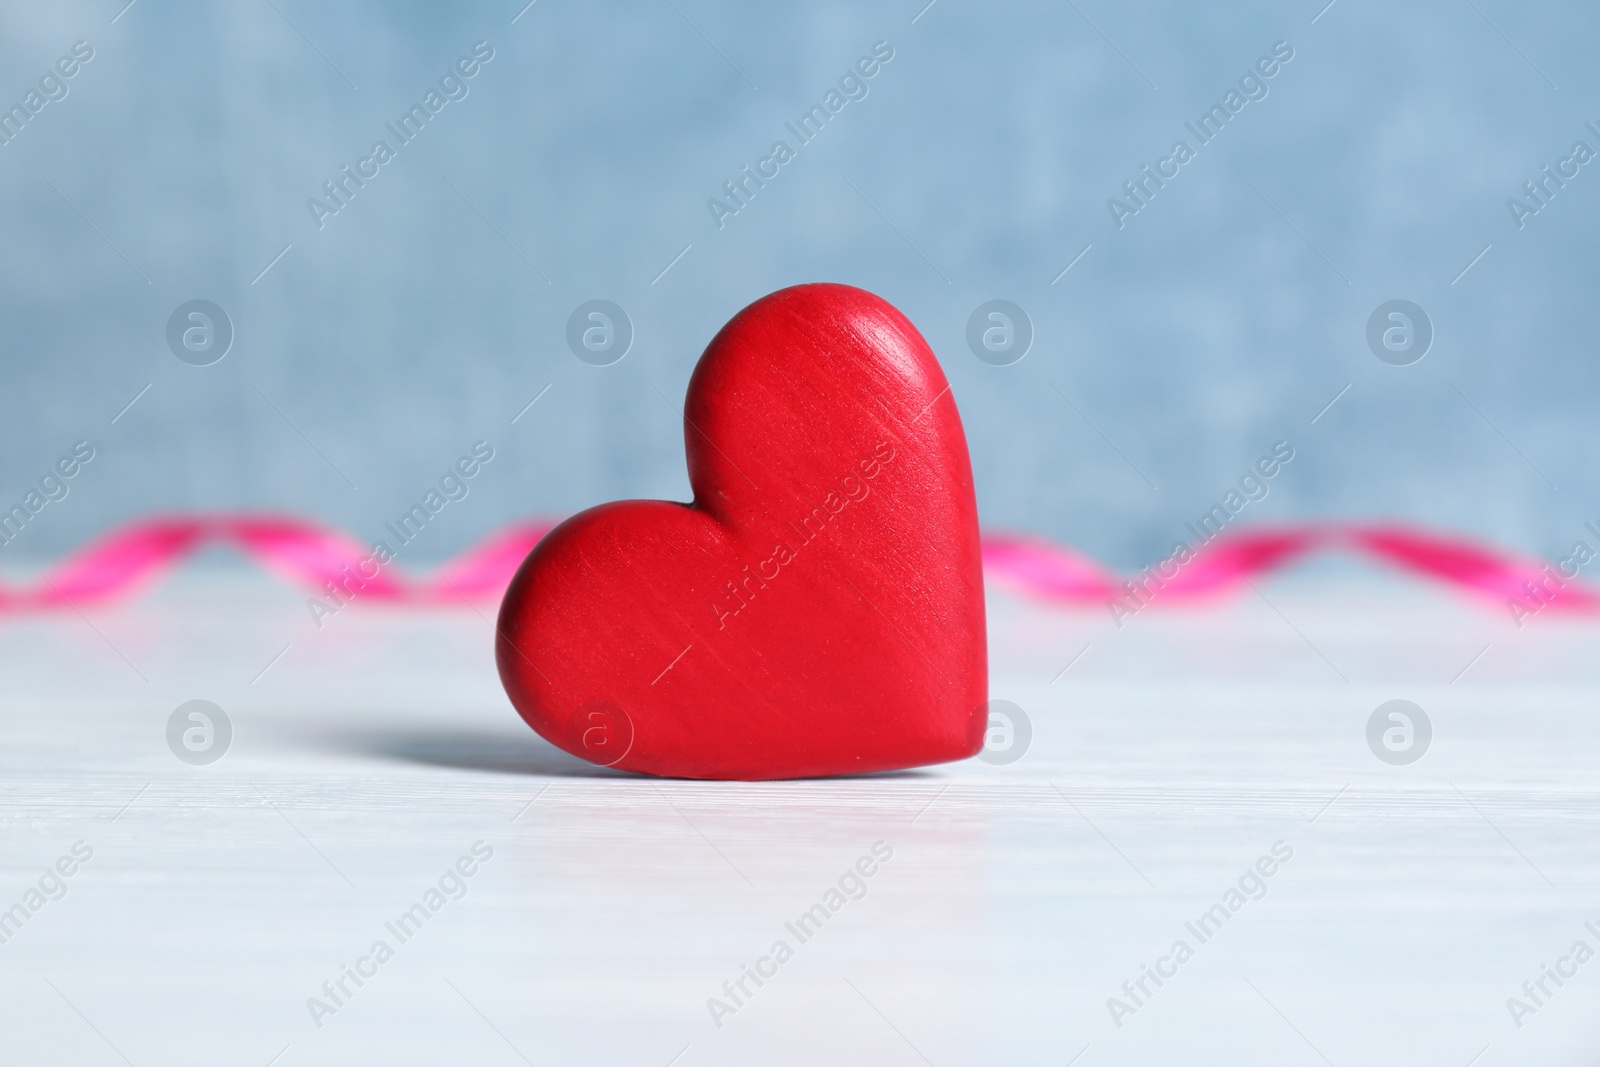 Photo of Red decorative heart as symbol of love on table